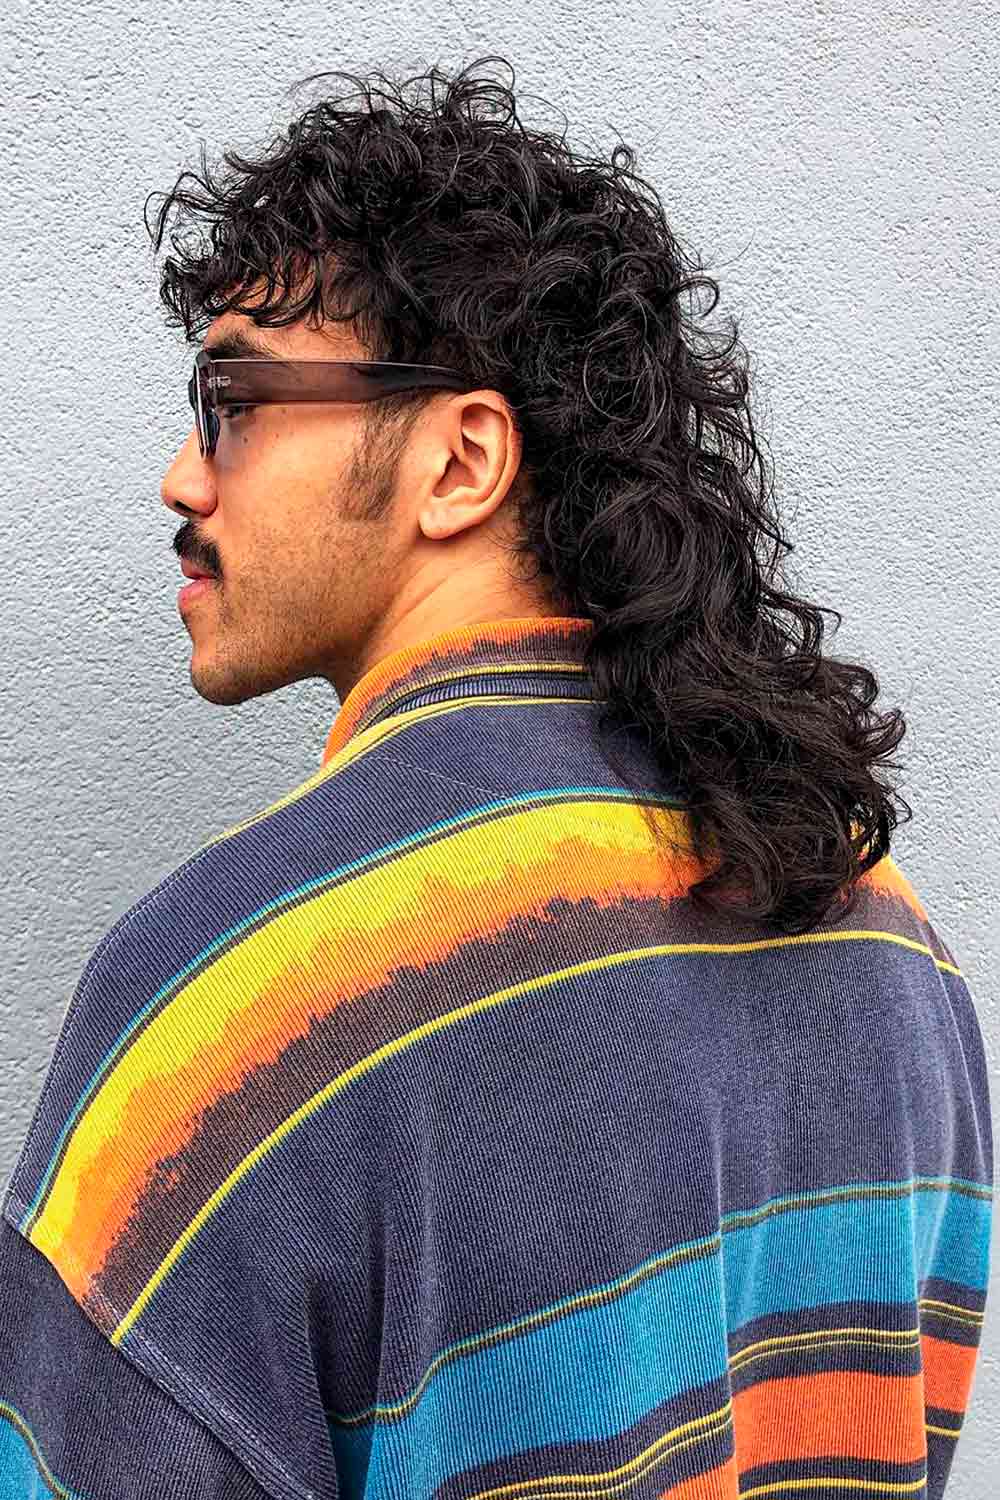 Wolf Cut On Curly Hair Men #wolfcutmen #wolfhairstylemen #wolfhaircut